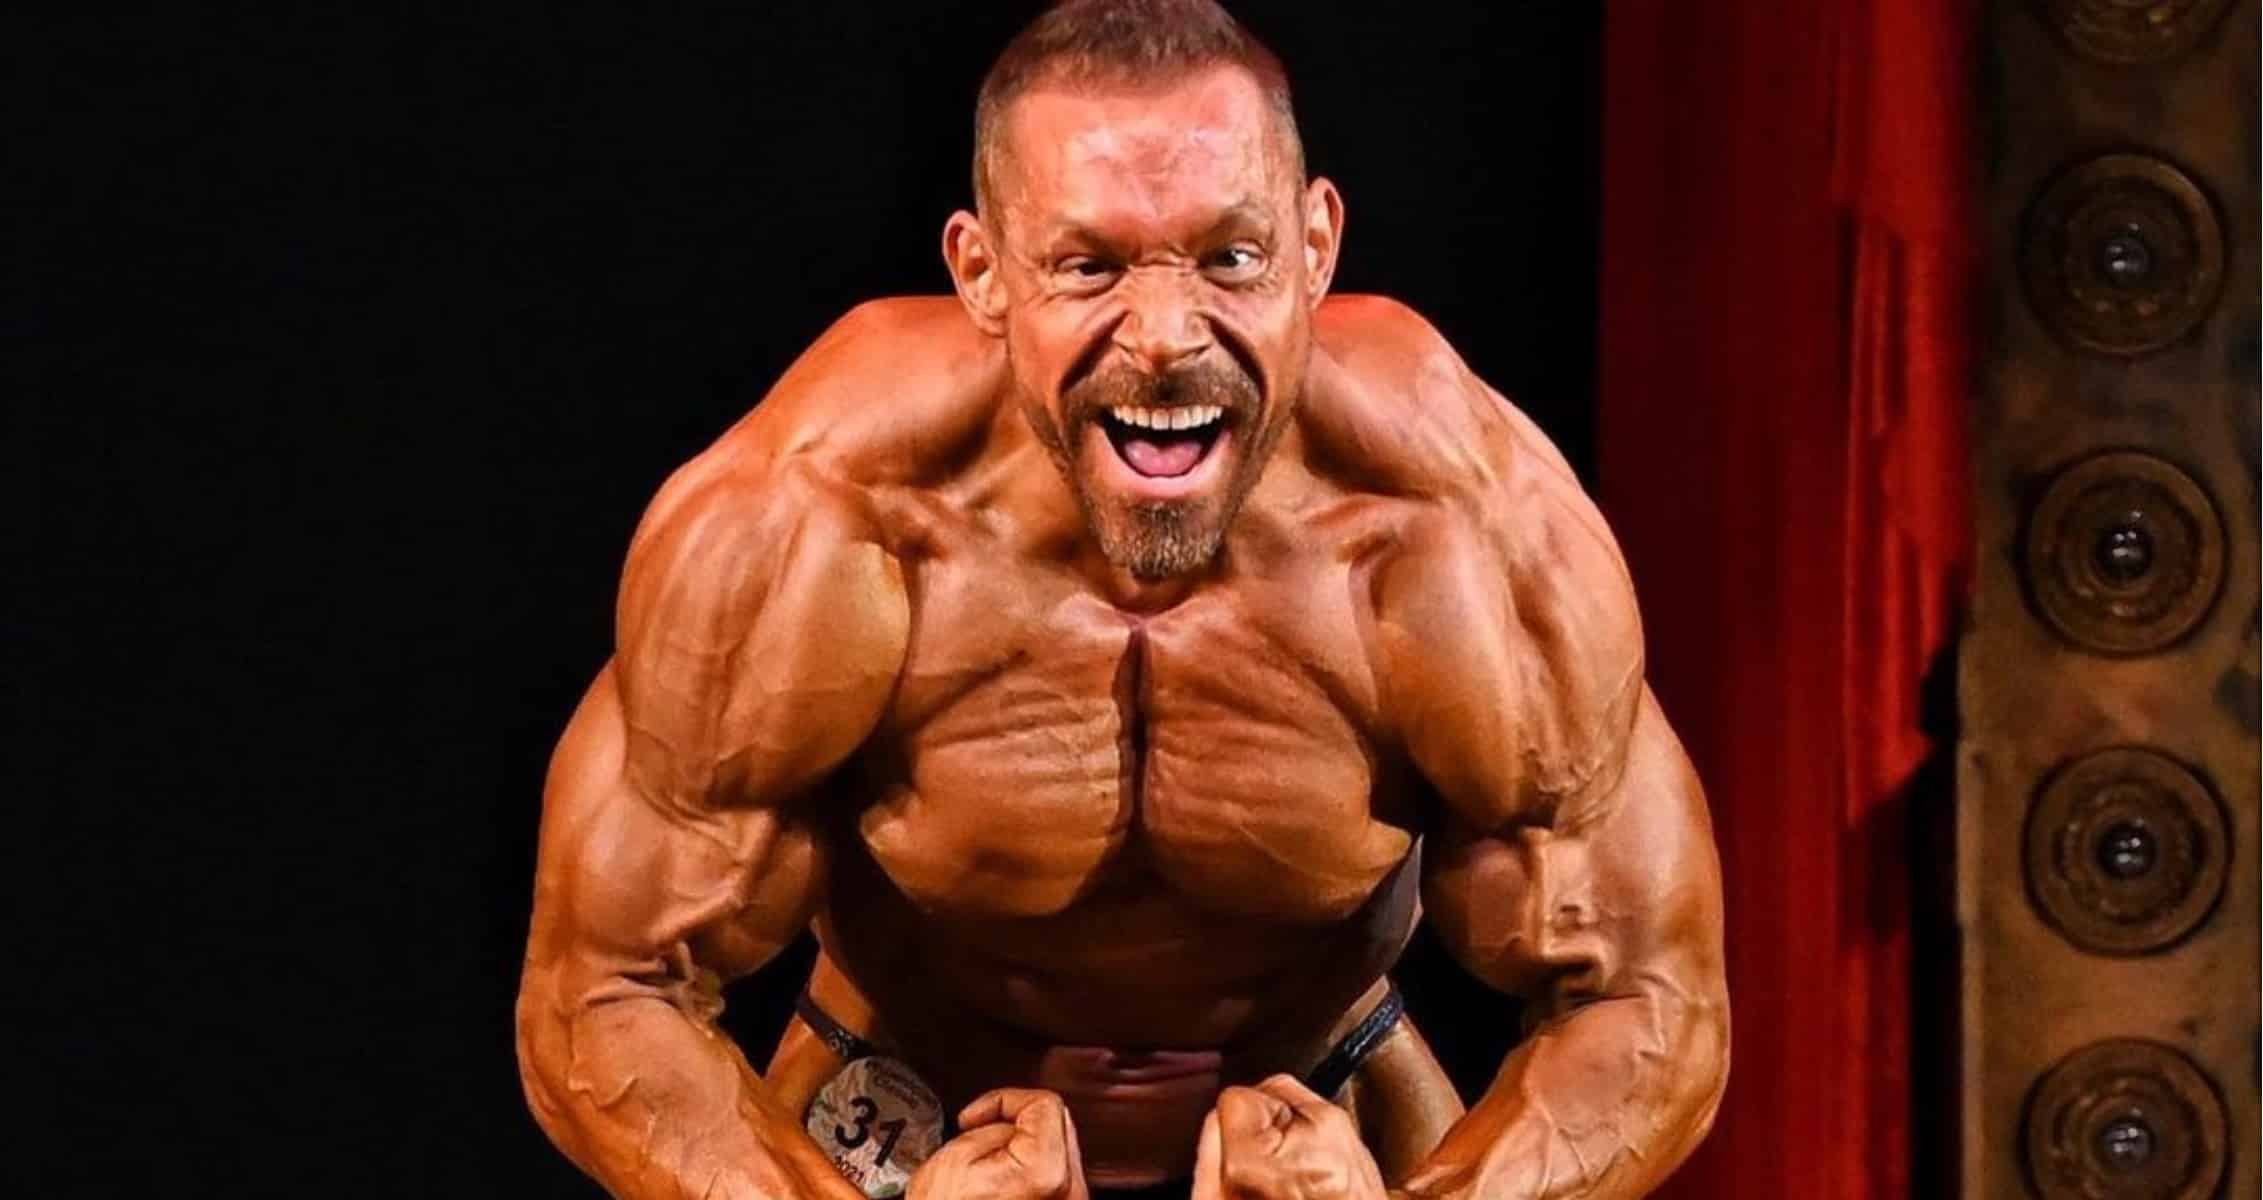 Natural Olympia Champ Paul Krueger Lists the 5 Pillars of Bodybuilding